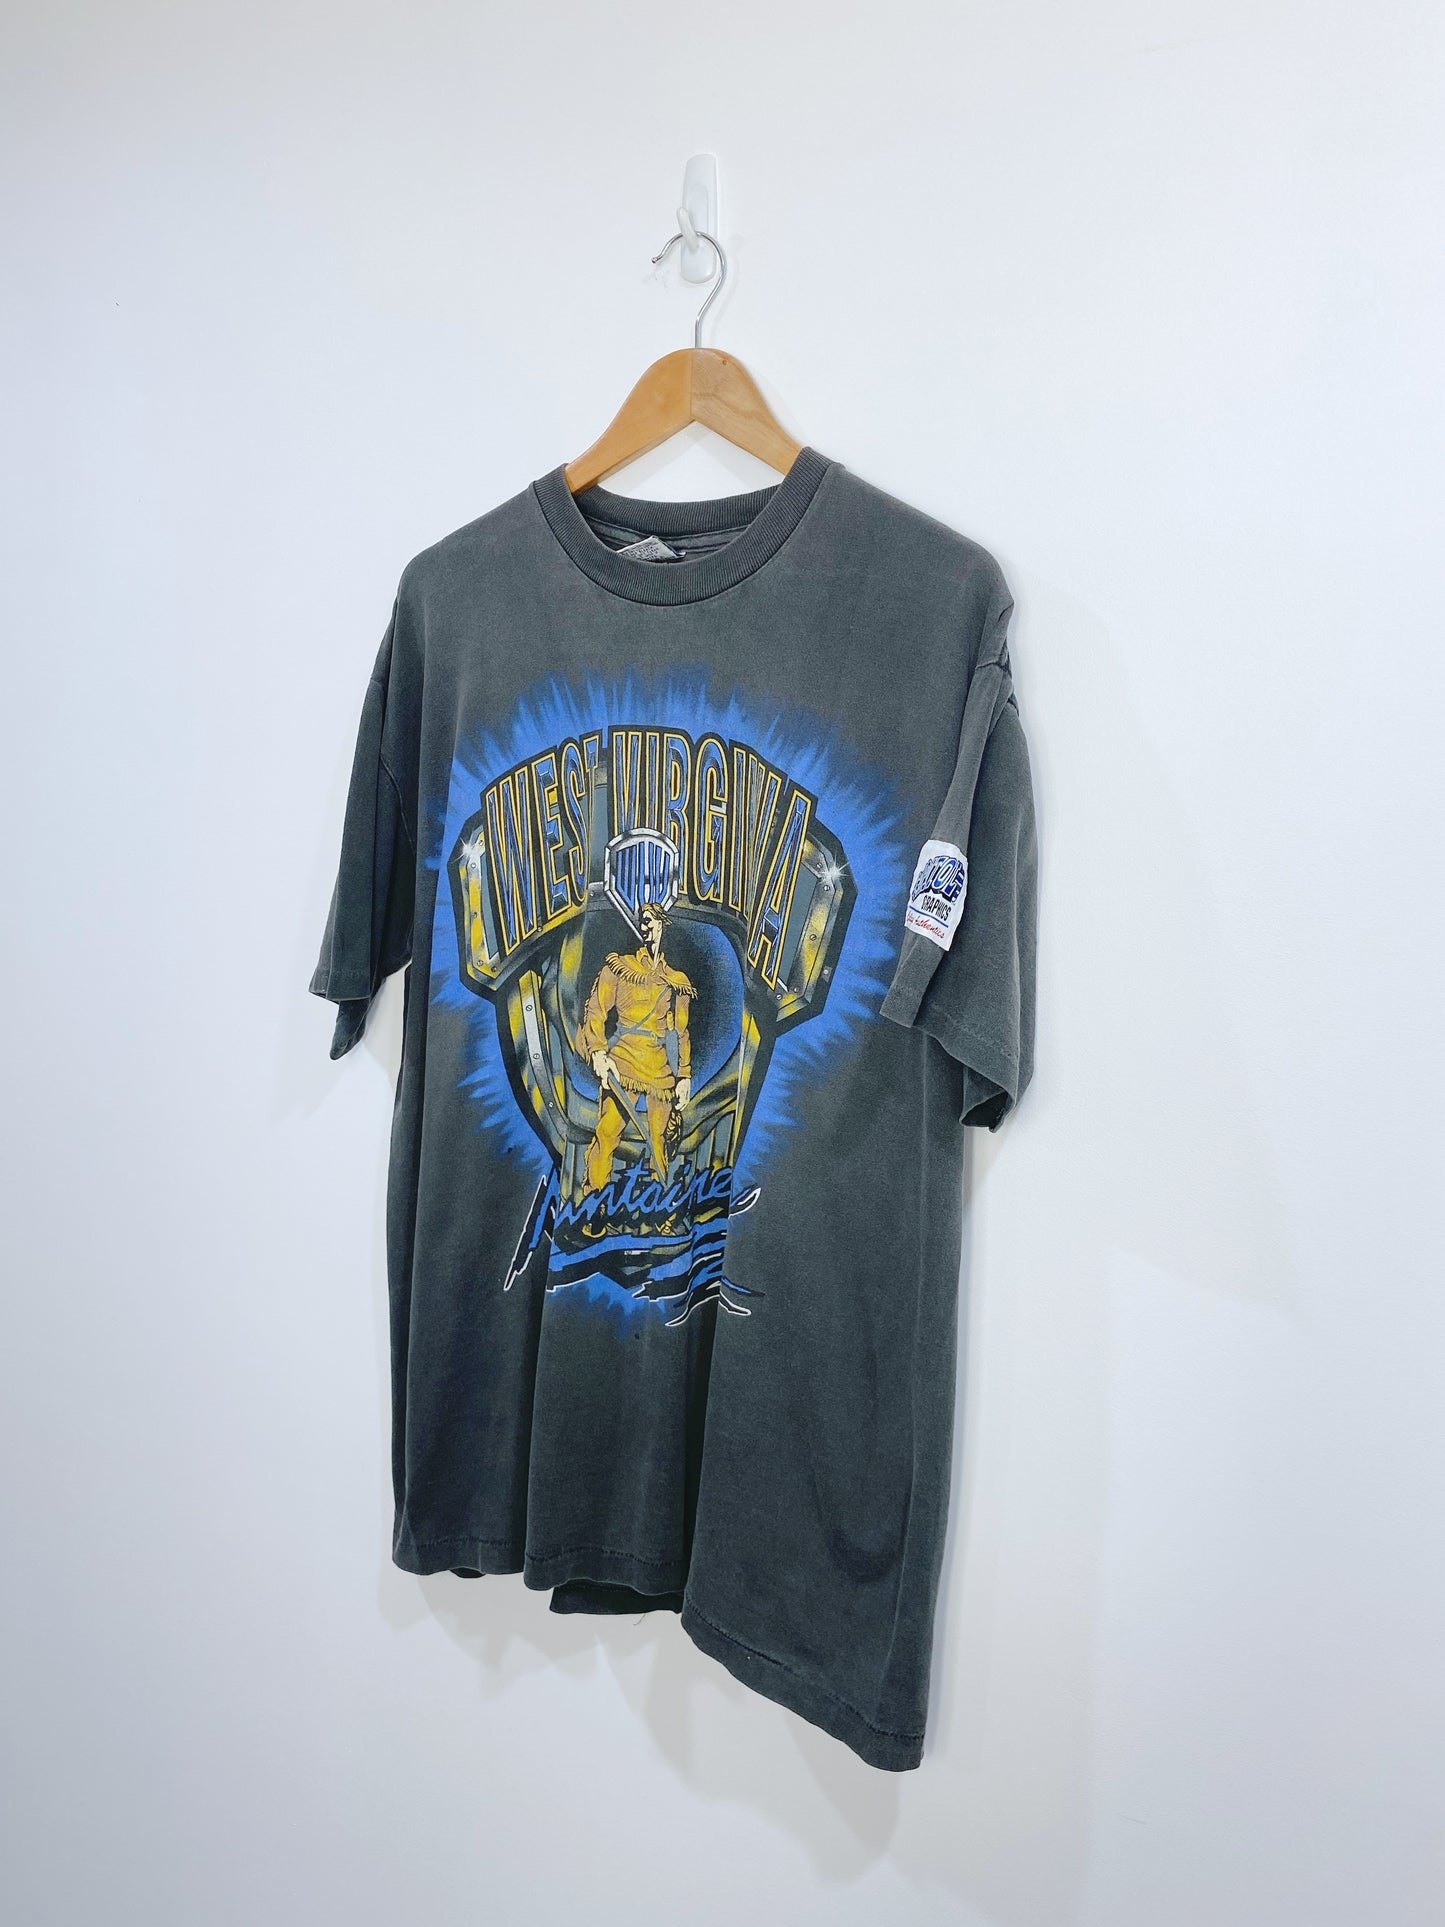 Vintage 90s West Virginia Mountaineers T-shirt L